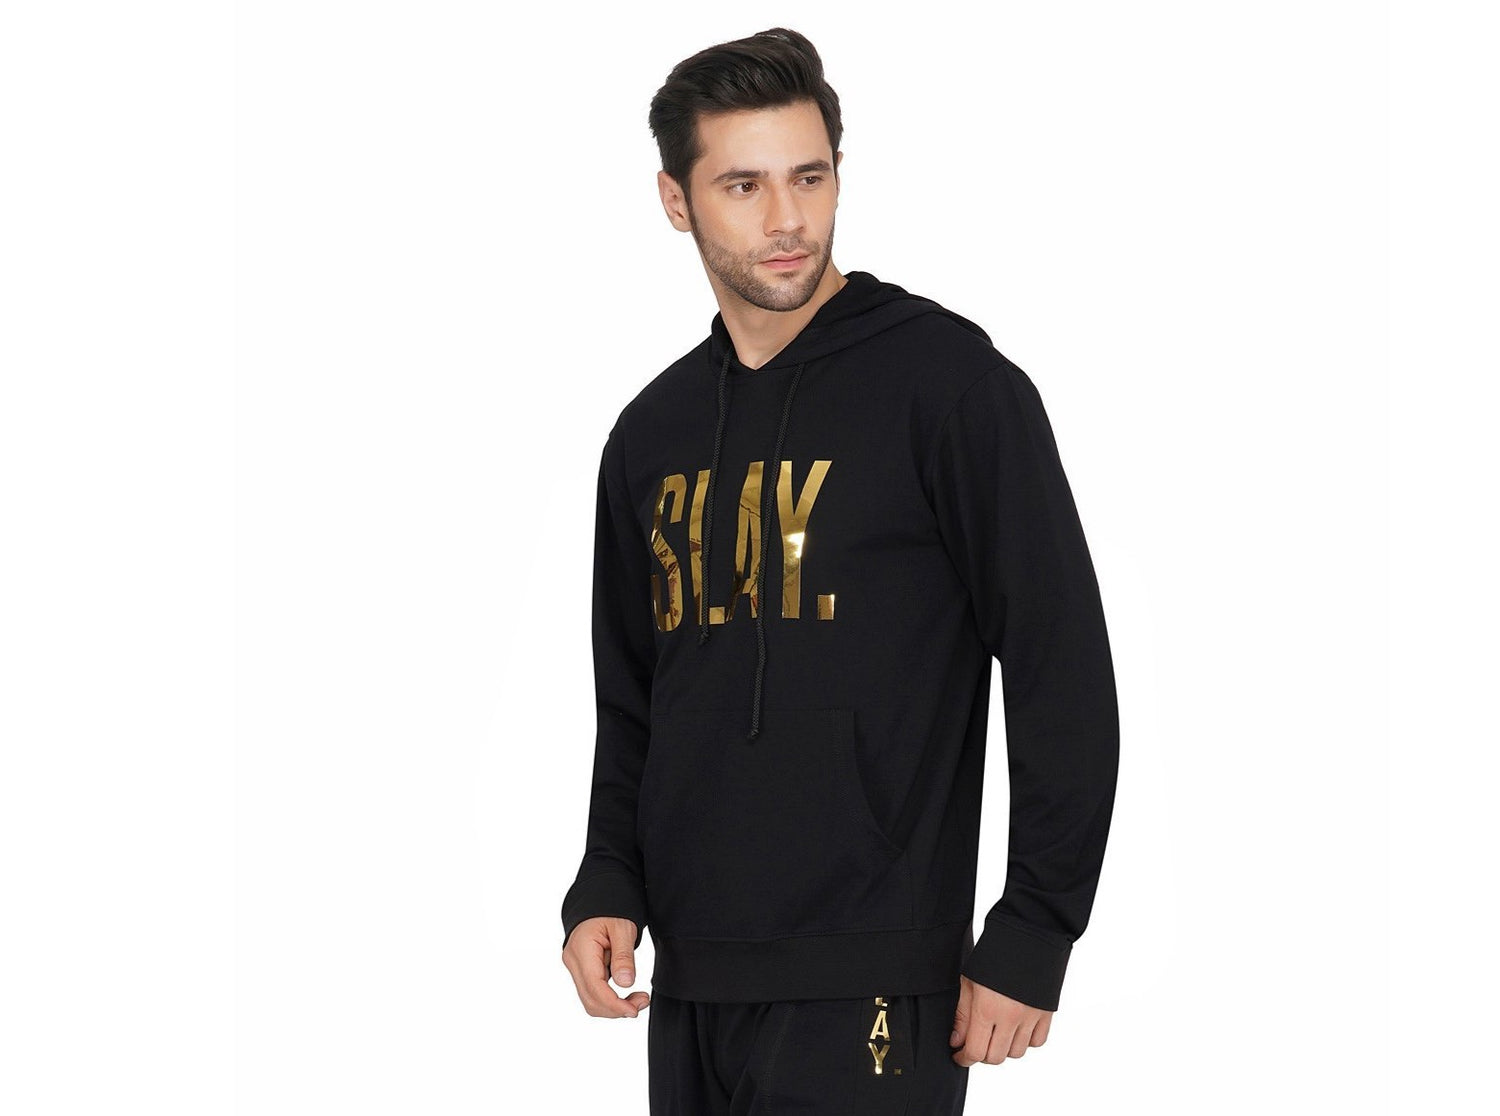 SLAY. Classic Men's Limited Edition Gold Foil Printed Black Printed Hoodie-clothing-to-slay.myshopify.com-Hoodie